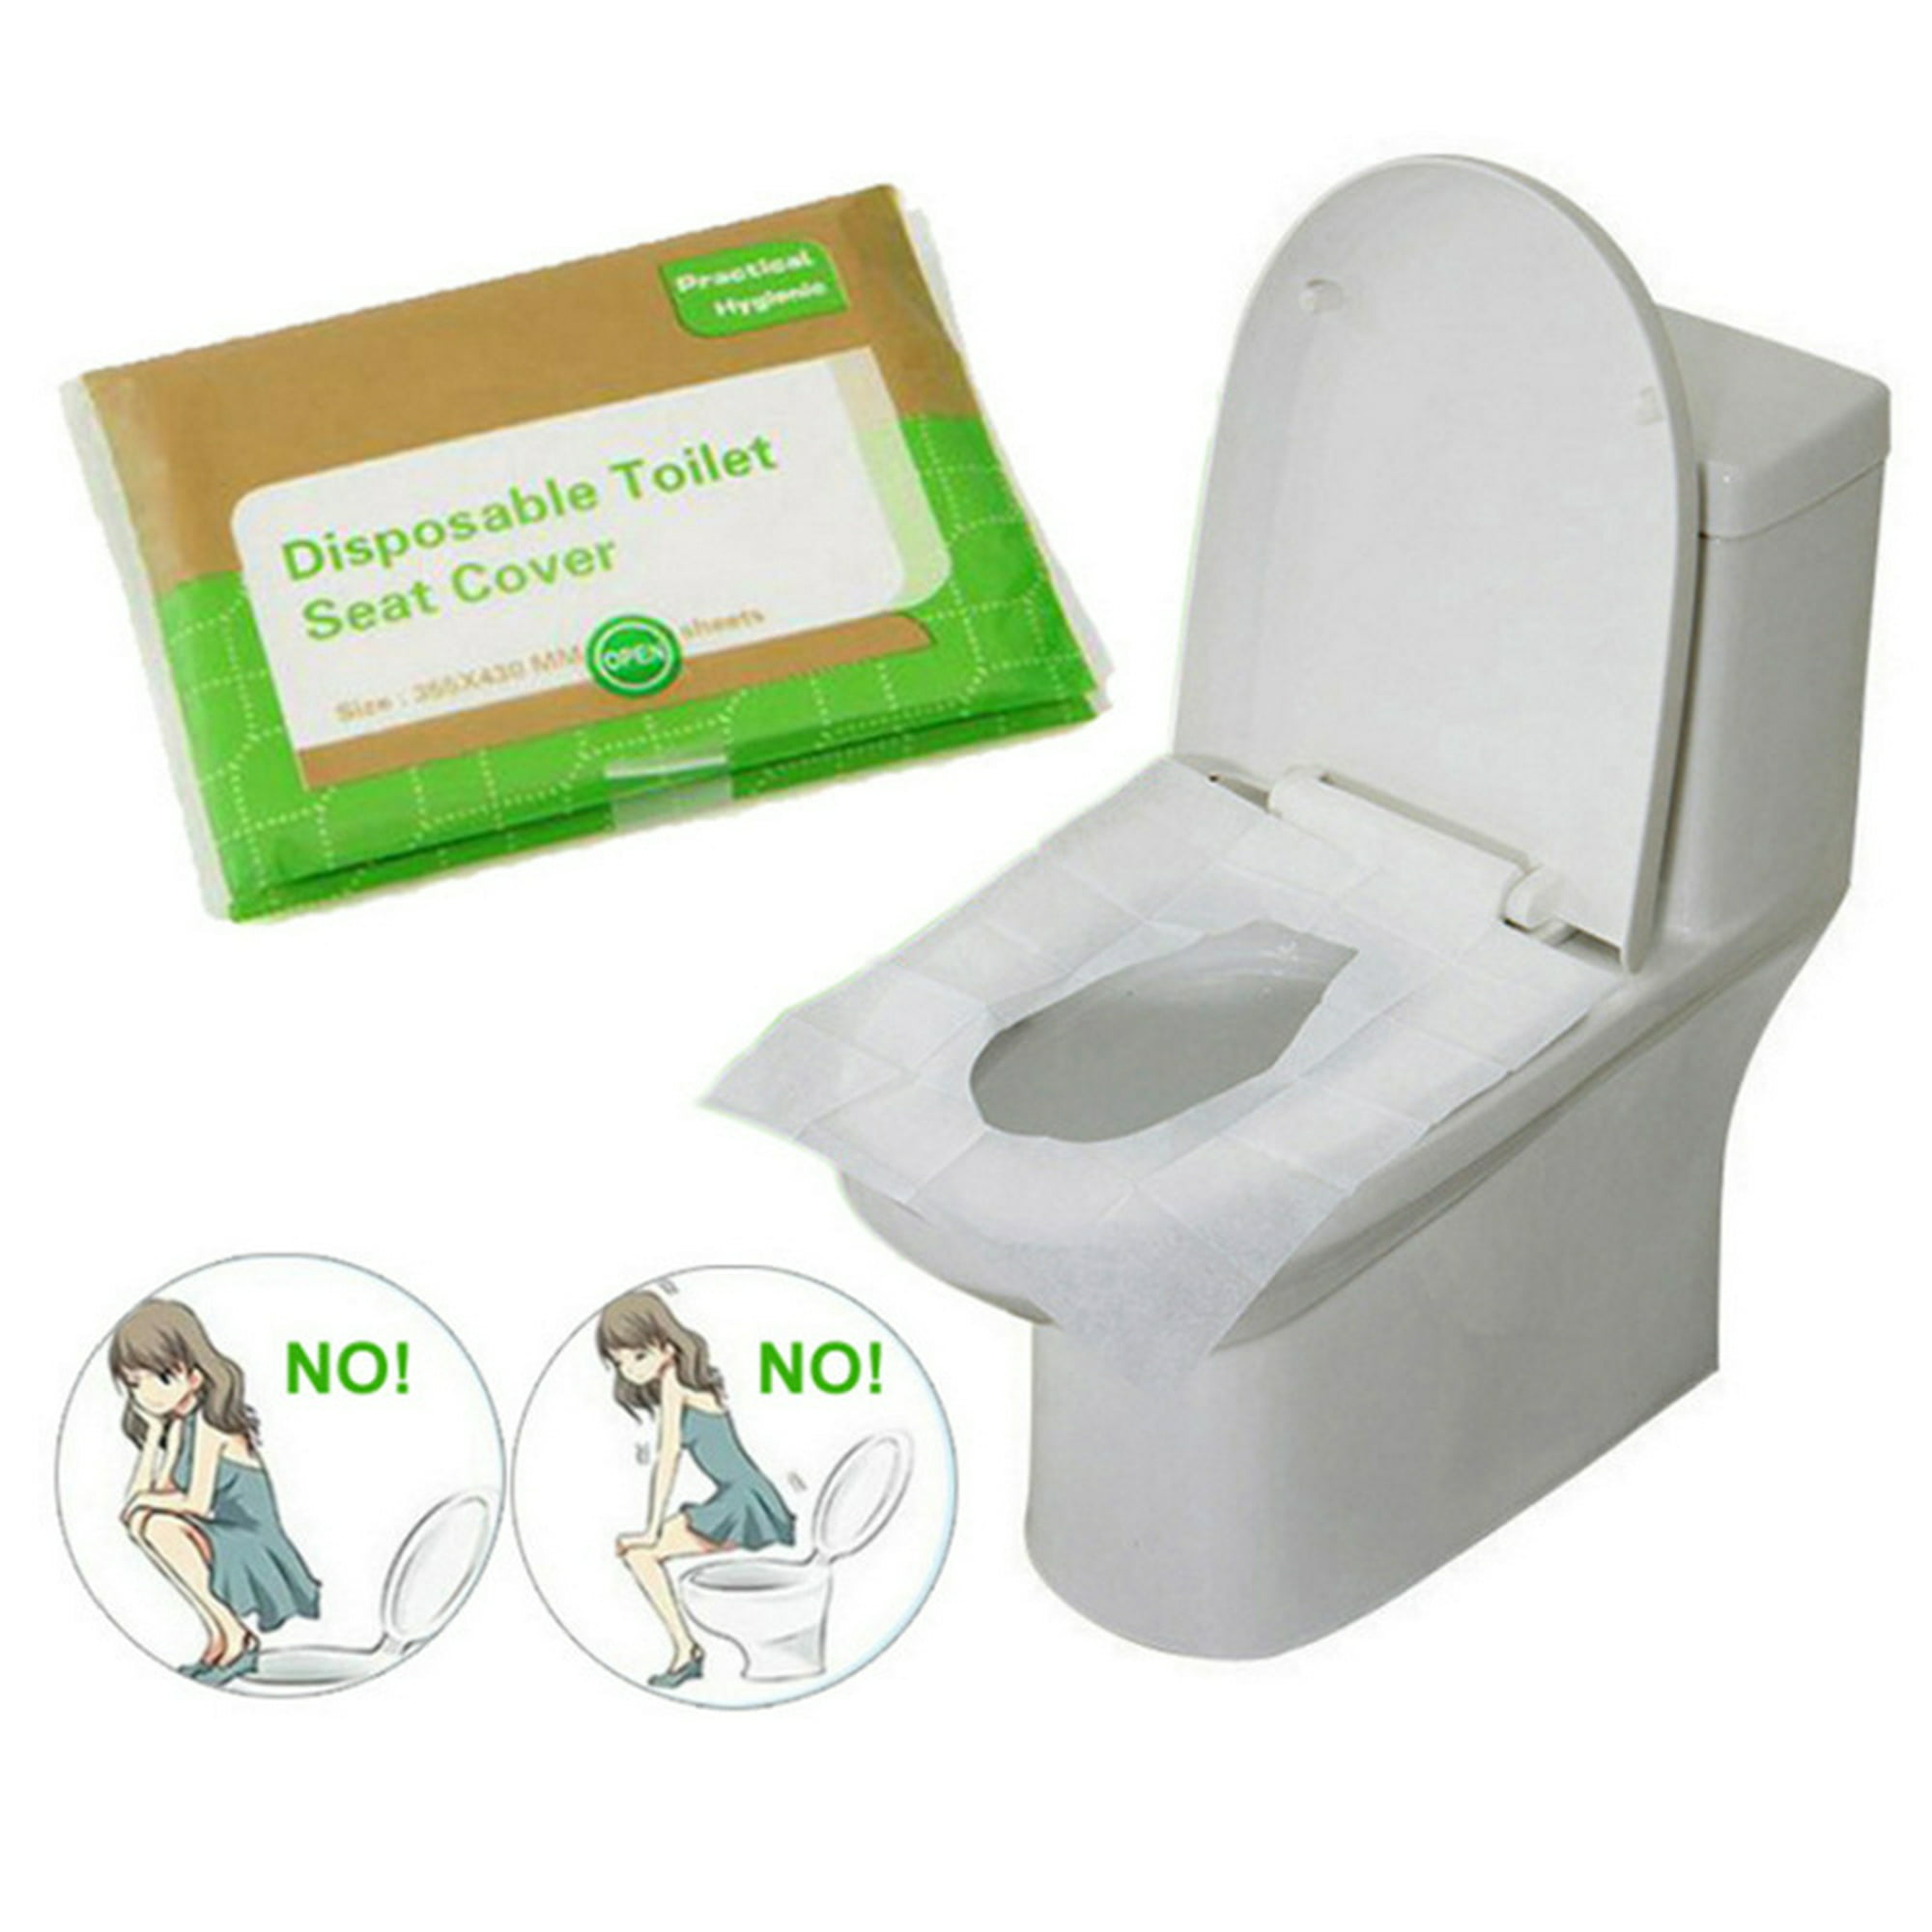 GENERICO 50x Cubre Inodoro Desechable Wc Protector Baño Impermeable